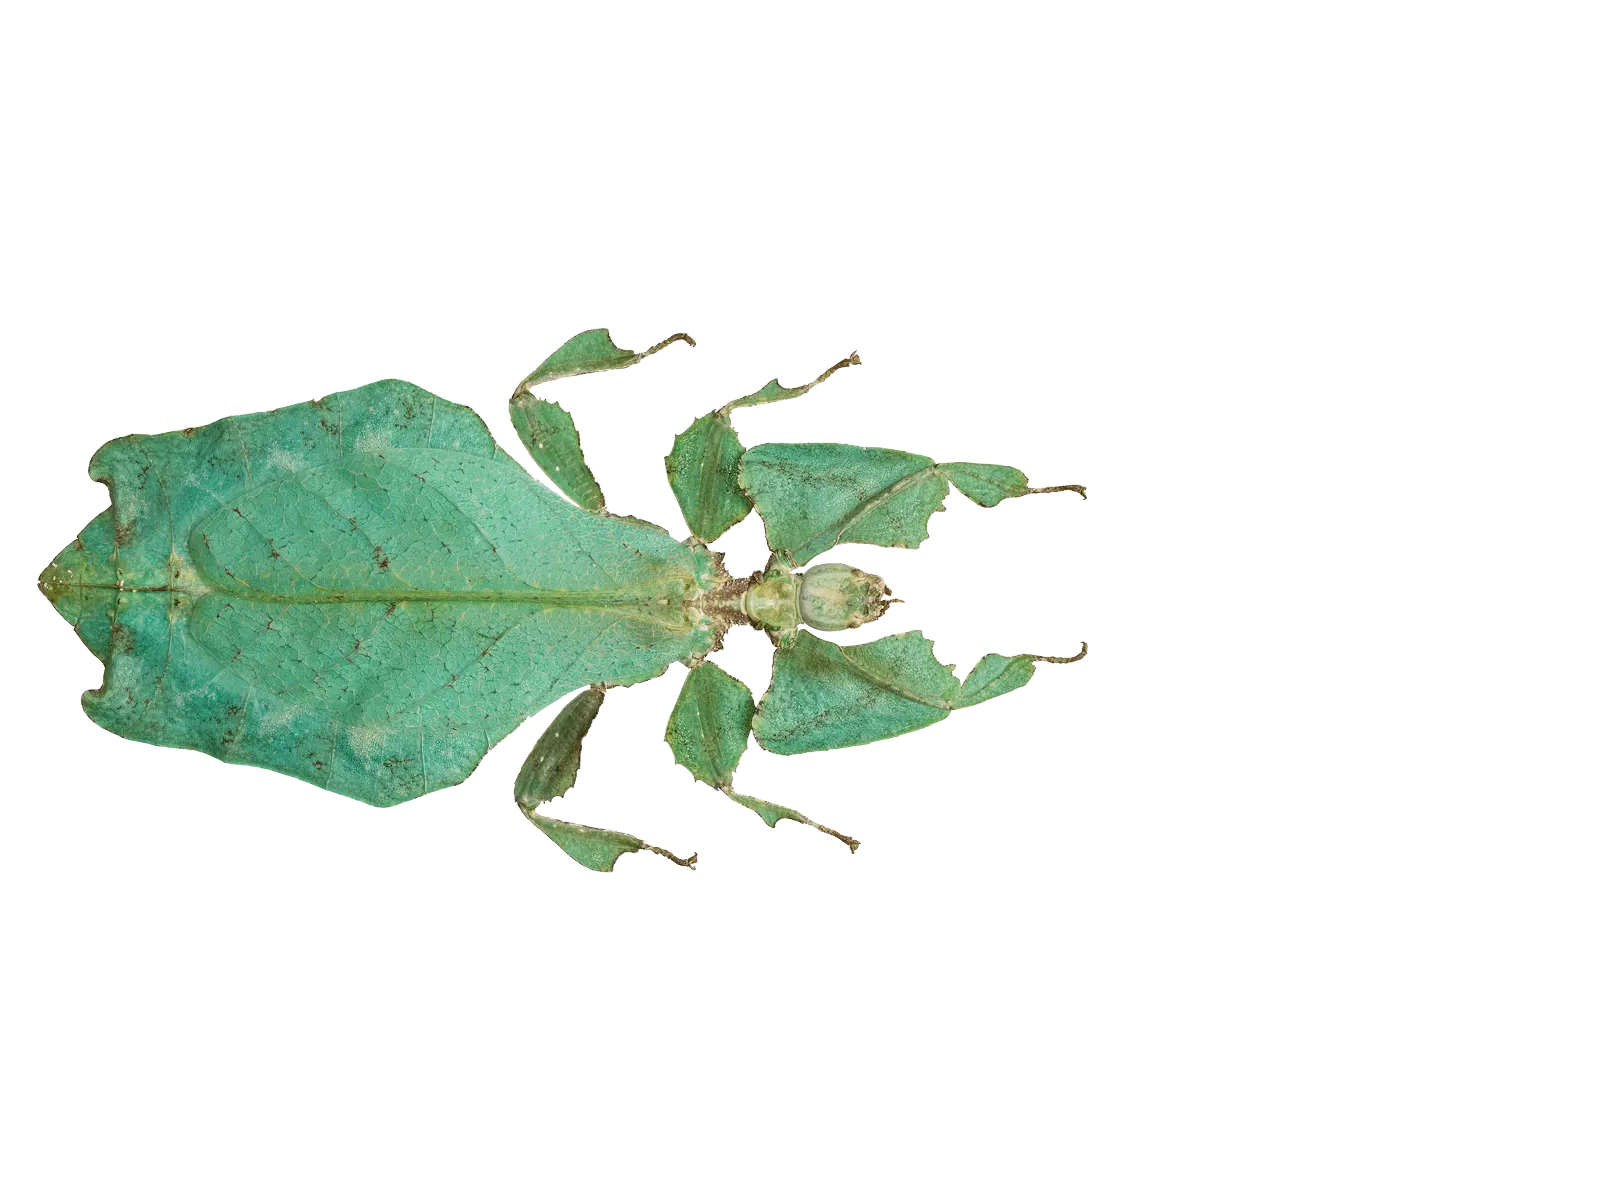 Gray's leaf insect